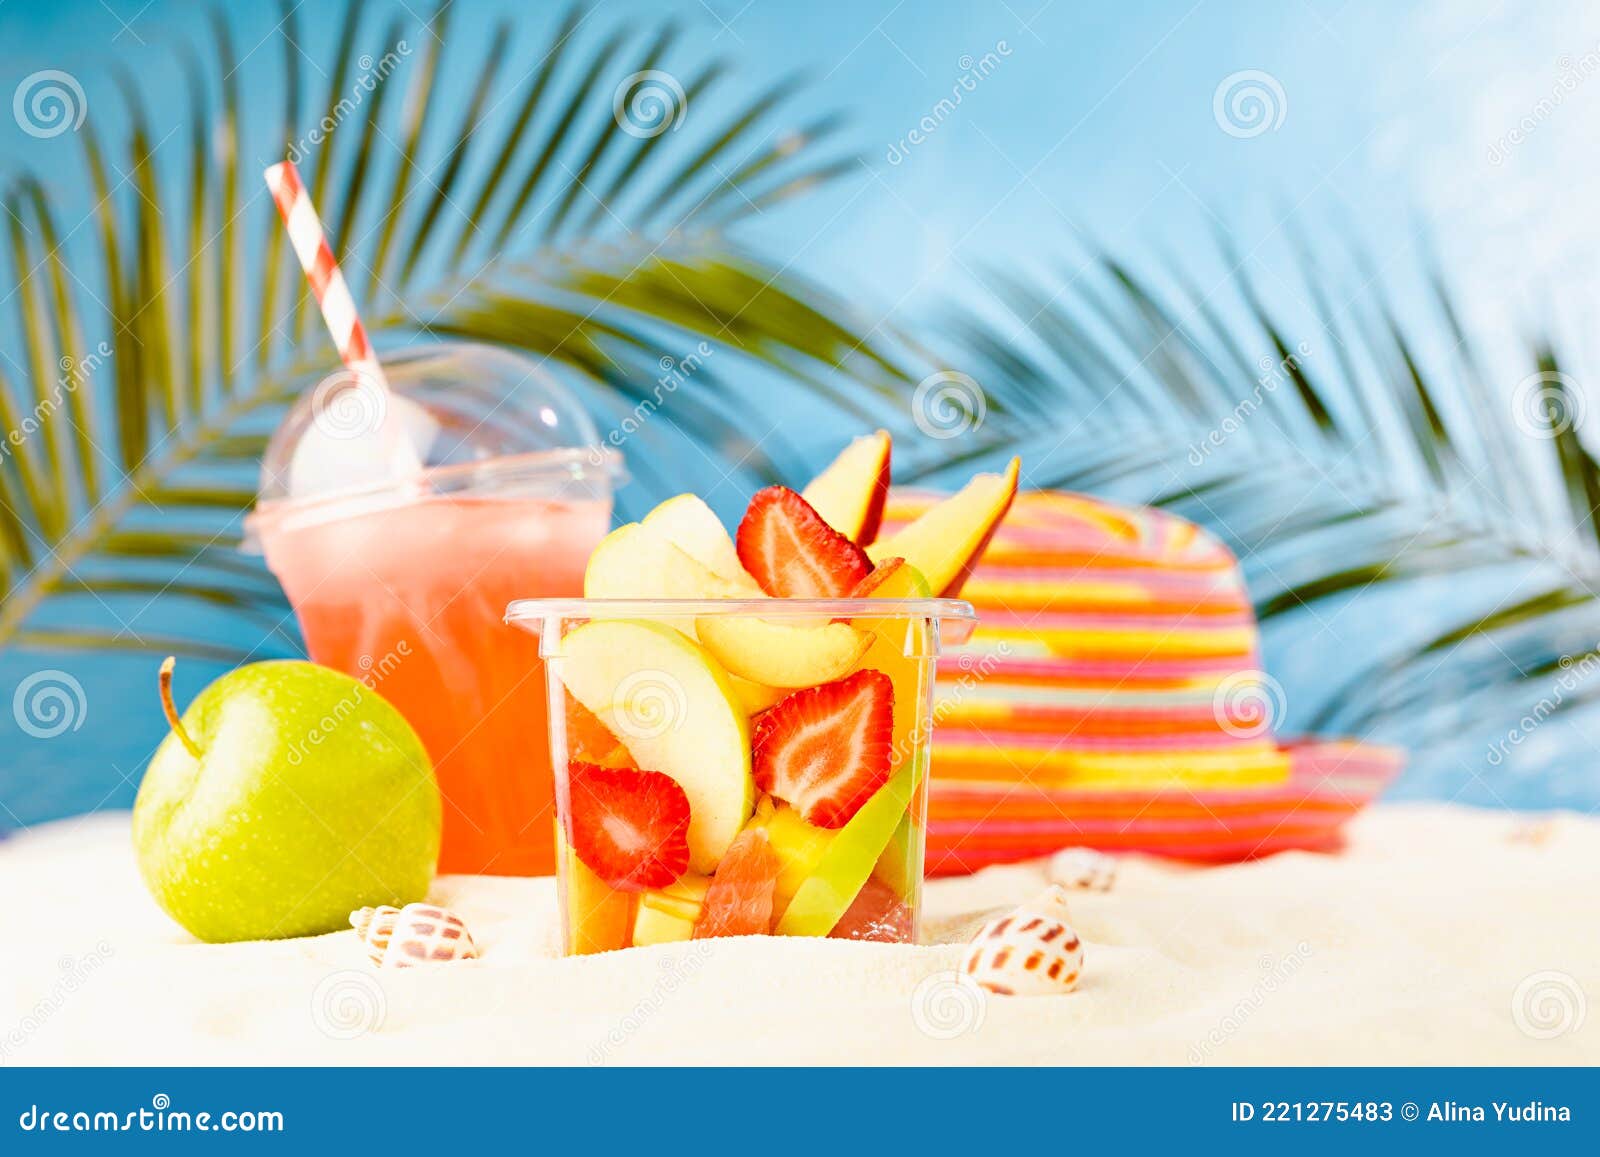 Fresh Summer Takeaway Food on Tropical Beach - Fruit Salad, Cold Drink,  Green Apple, Sun Hat on White Sand with Palm Leaves. Stock Image - Image of  beach, drink: 221275483